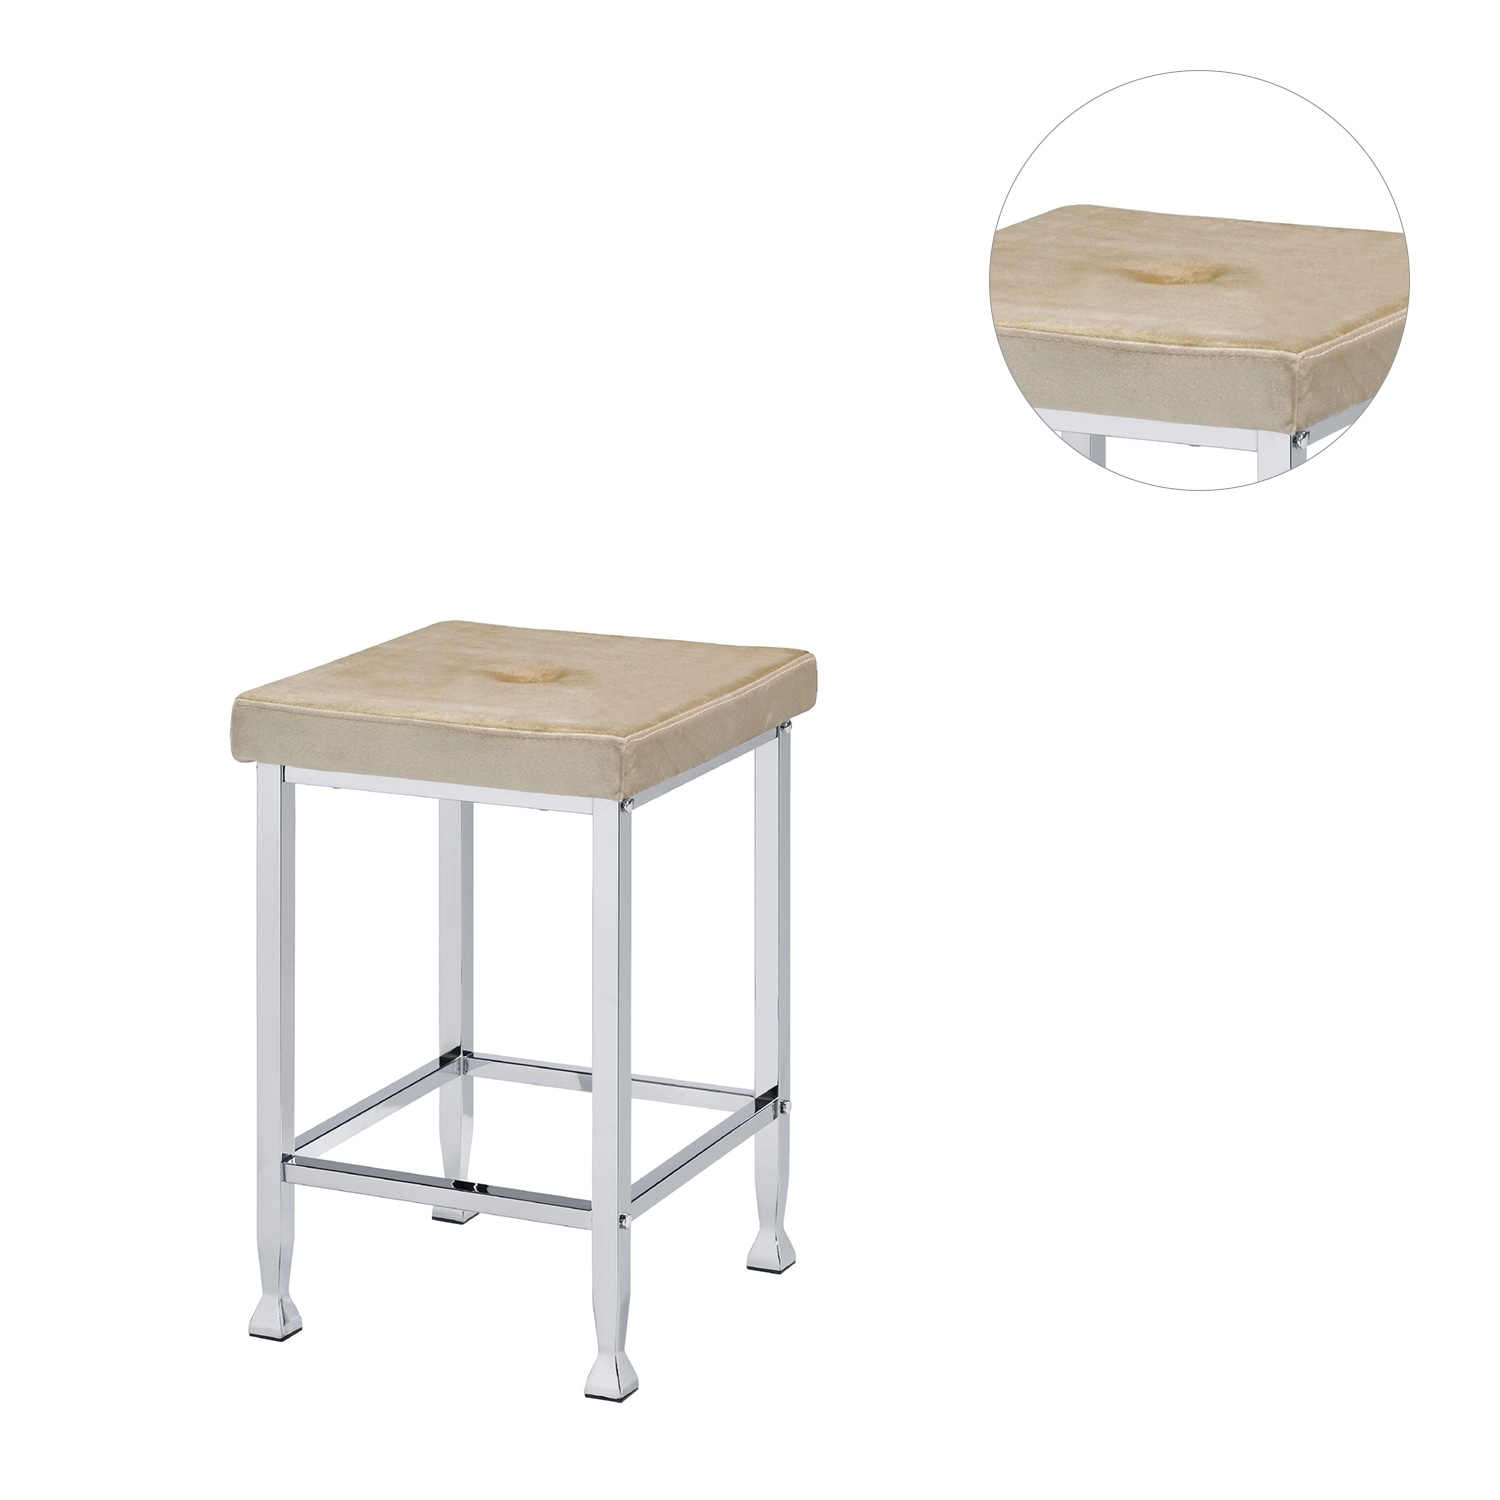 Set of 2 PU Upholstered Counter Height Stool in Beige and Chrome